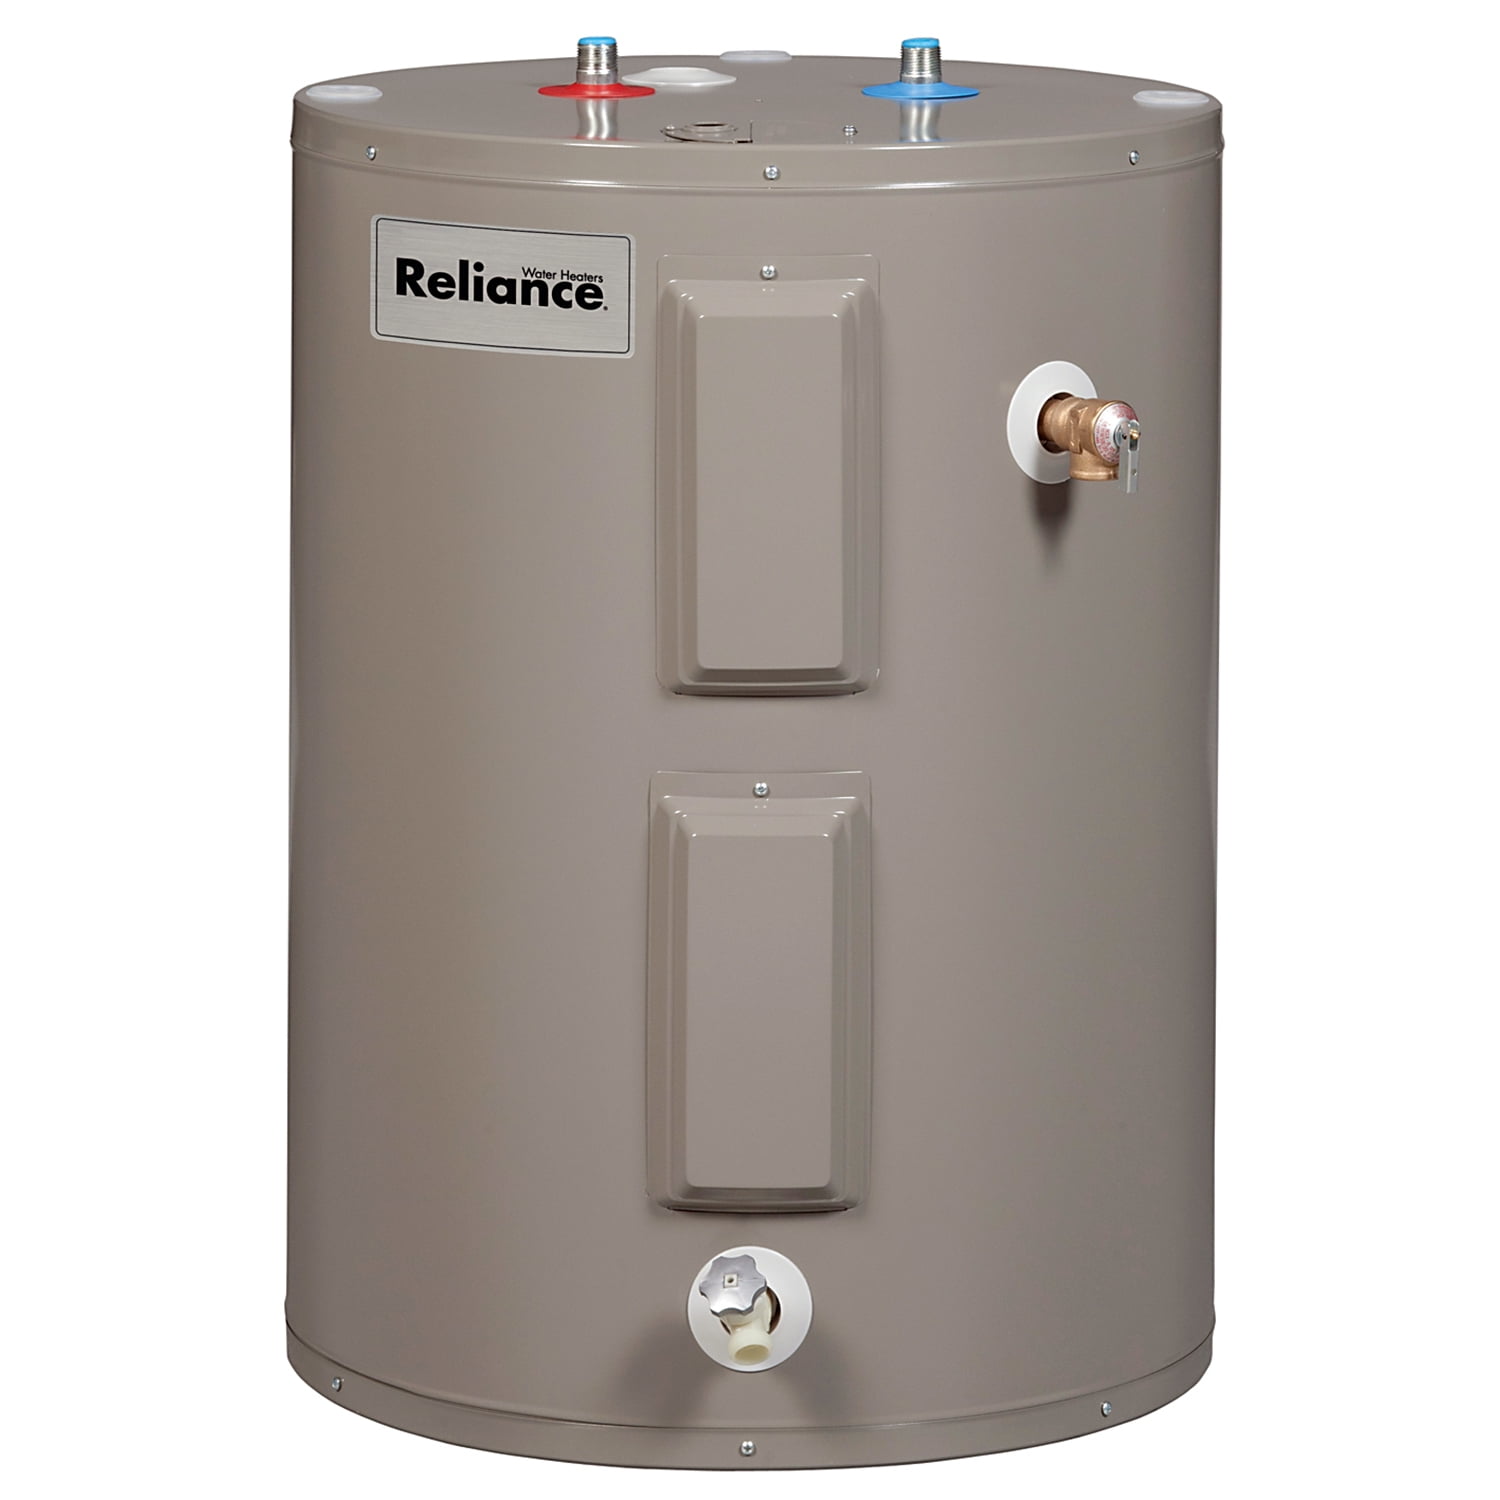 Reliance 6 30 EOLS 30 Gallon Electric Water Heater